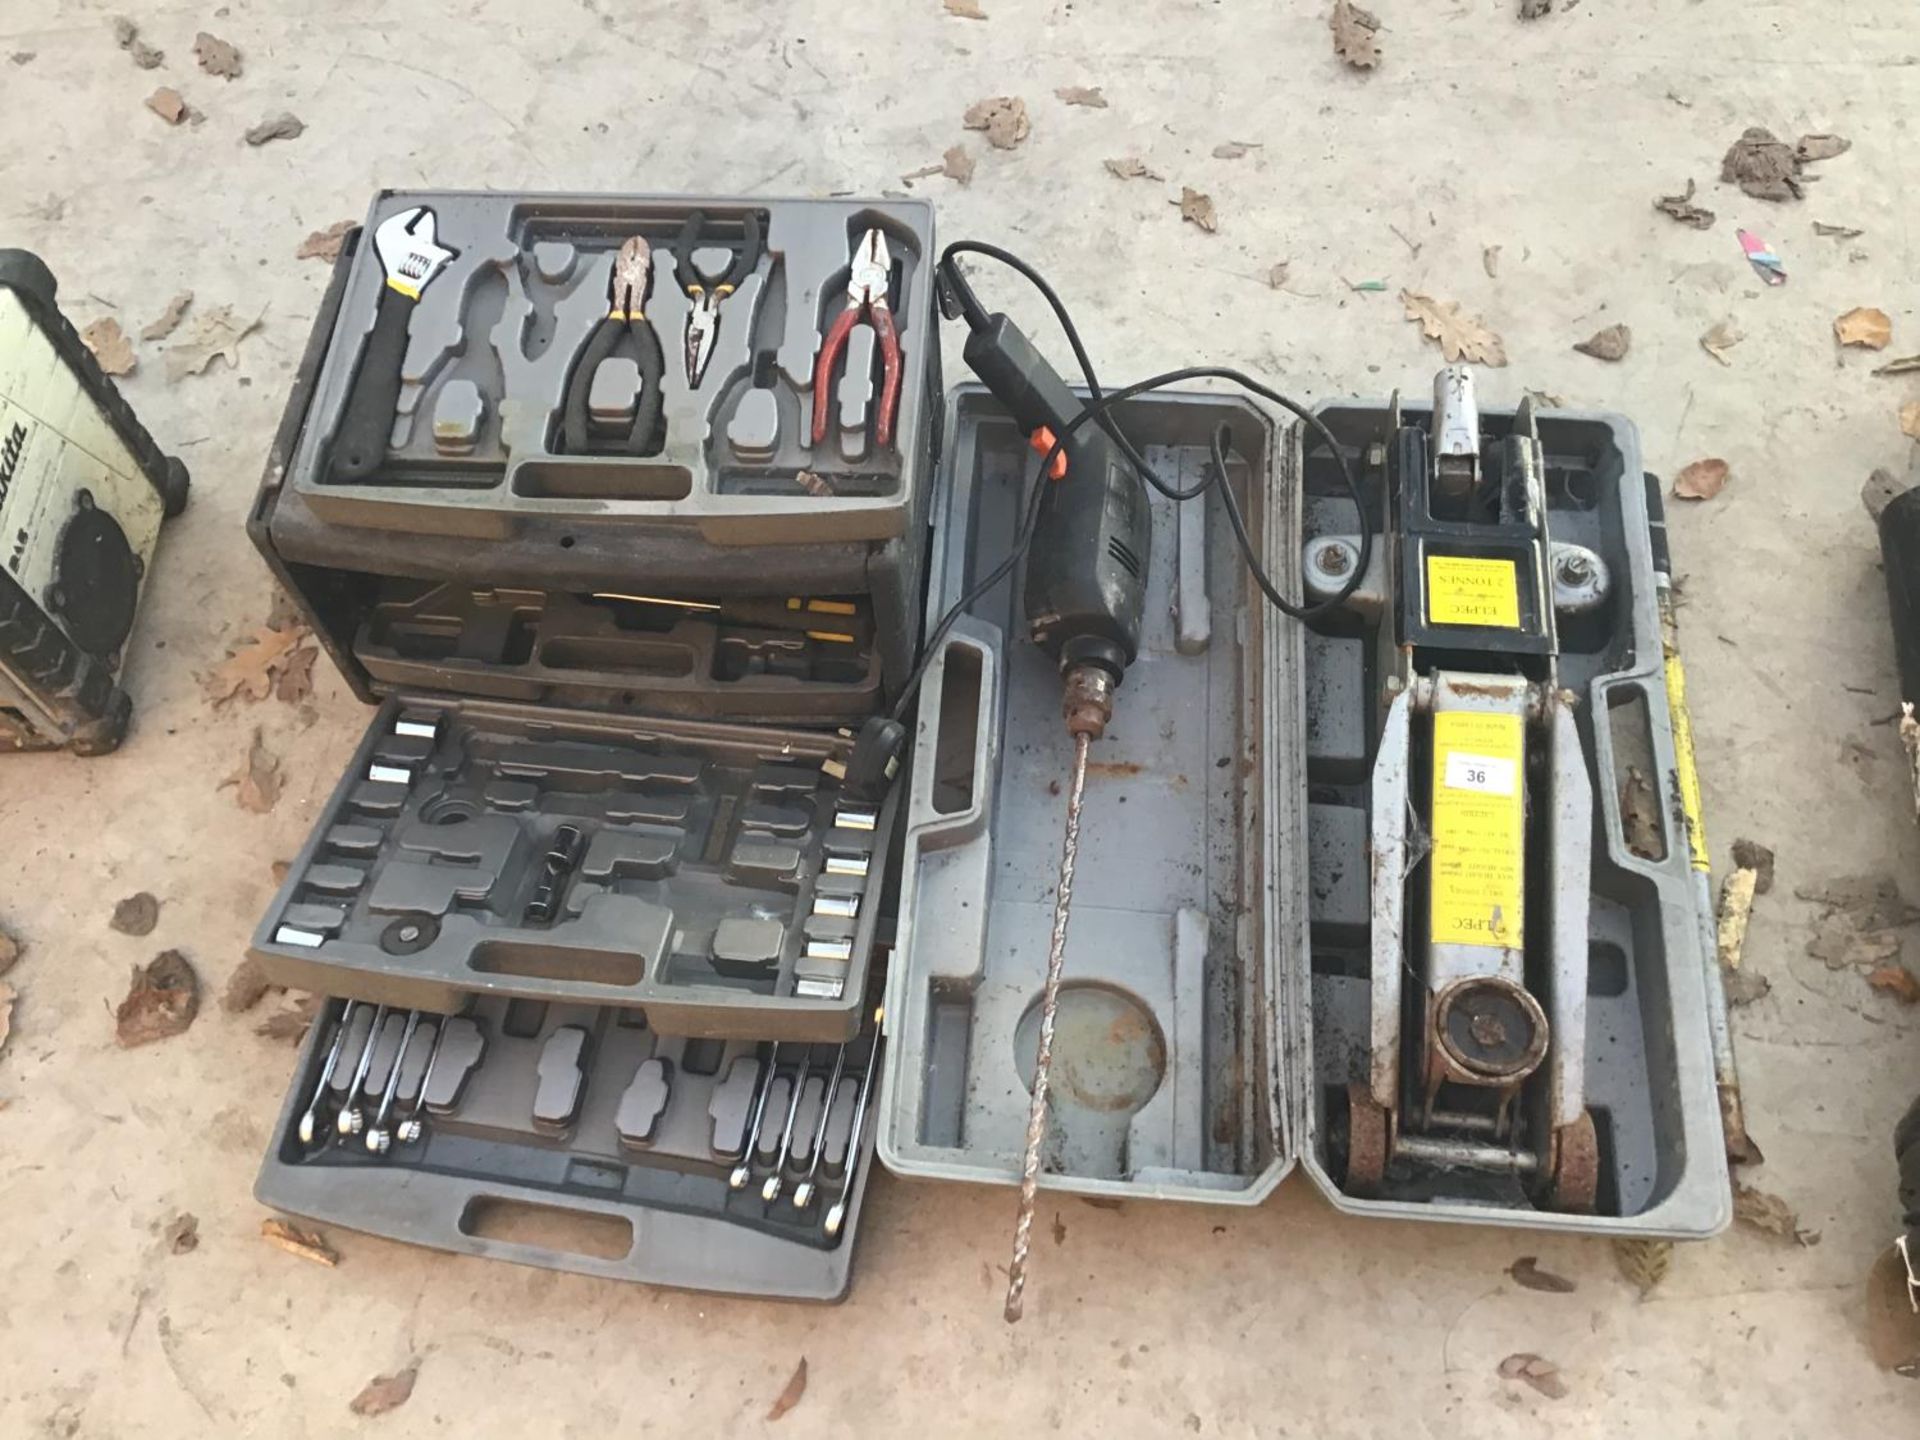 A CASED TWO TONNE JACK, DRILL, AND A TOOL BOX WITH CONTENTS TO INCLUDE SPANNERS, PLIERS, SOCKETS ETC